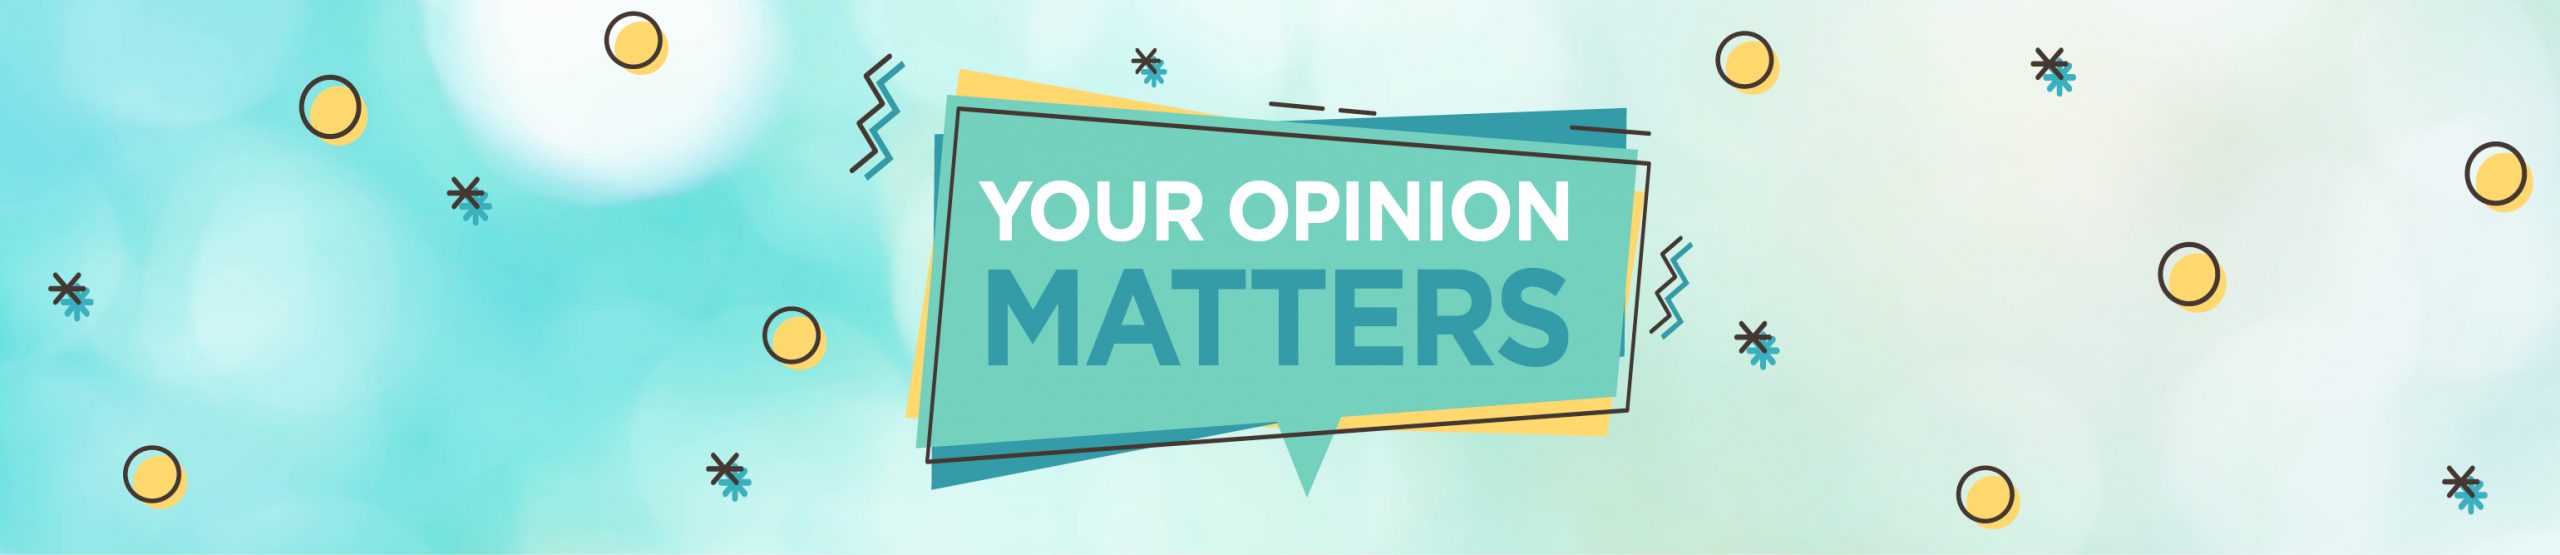 Graphic for Empowered Community that says Your Opinion Matters